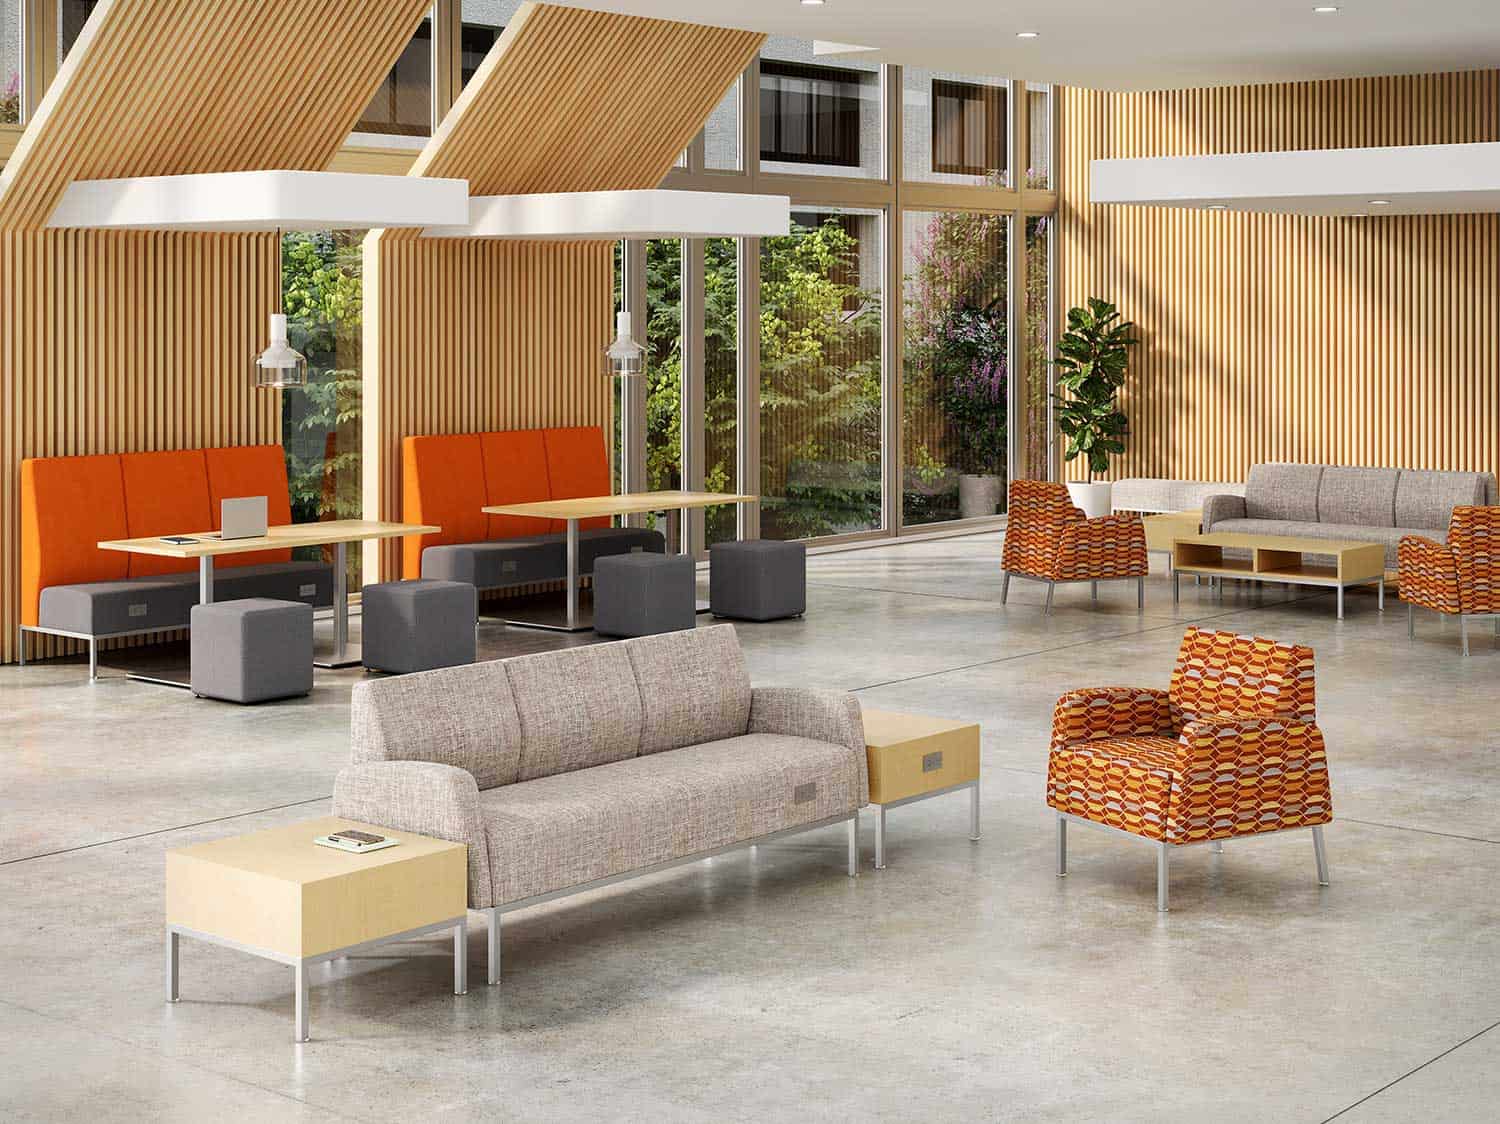 Student Furniture on College Campus from Saunder Education with products from the Tanner Collection including sofa, chair, tables and booth seating for campus lounge areas.